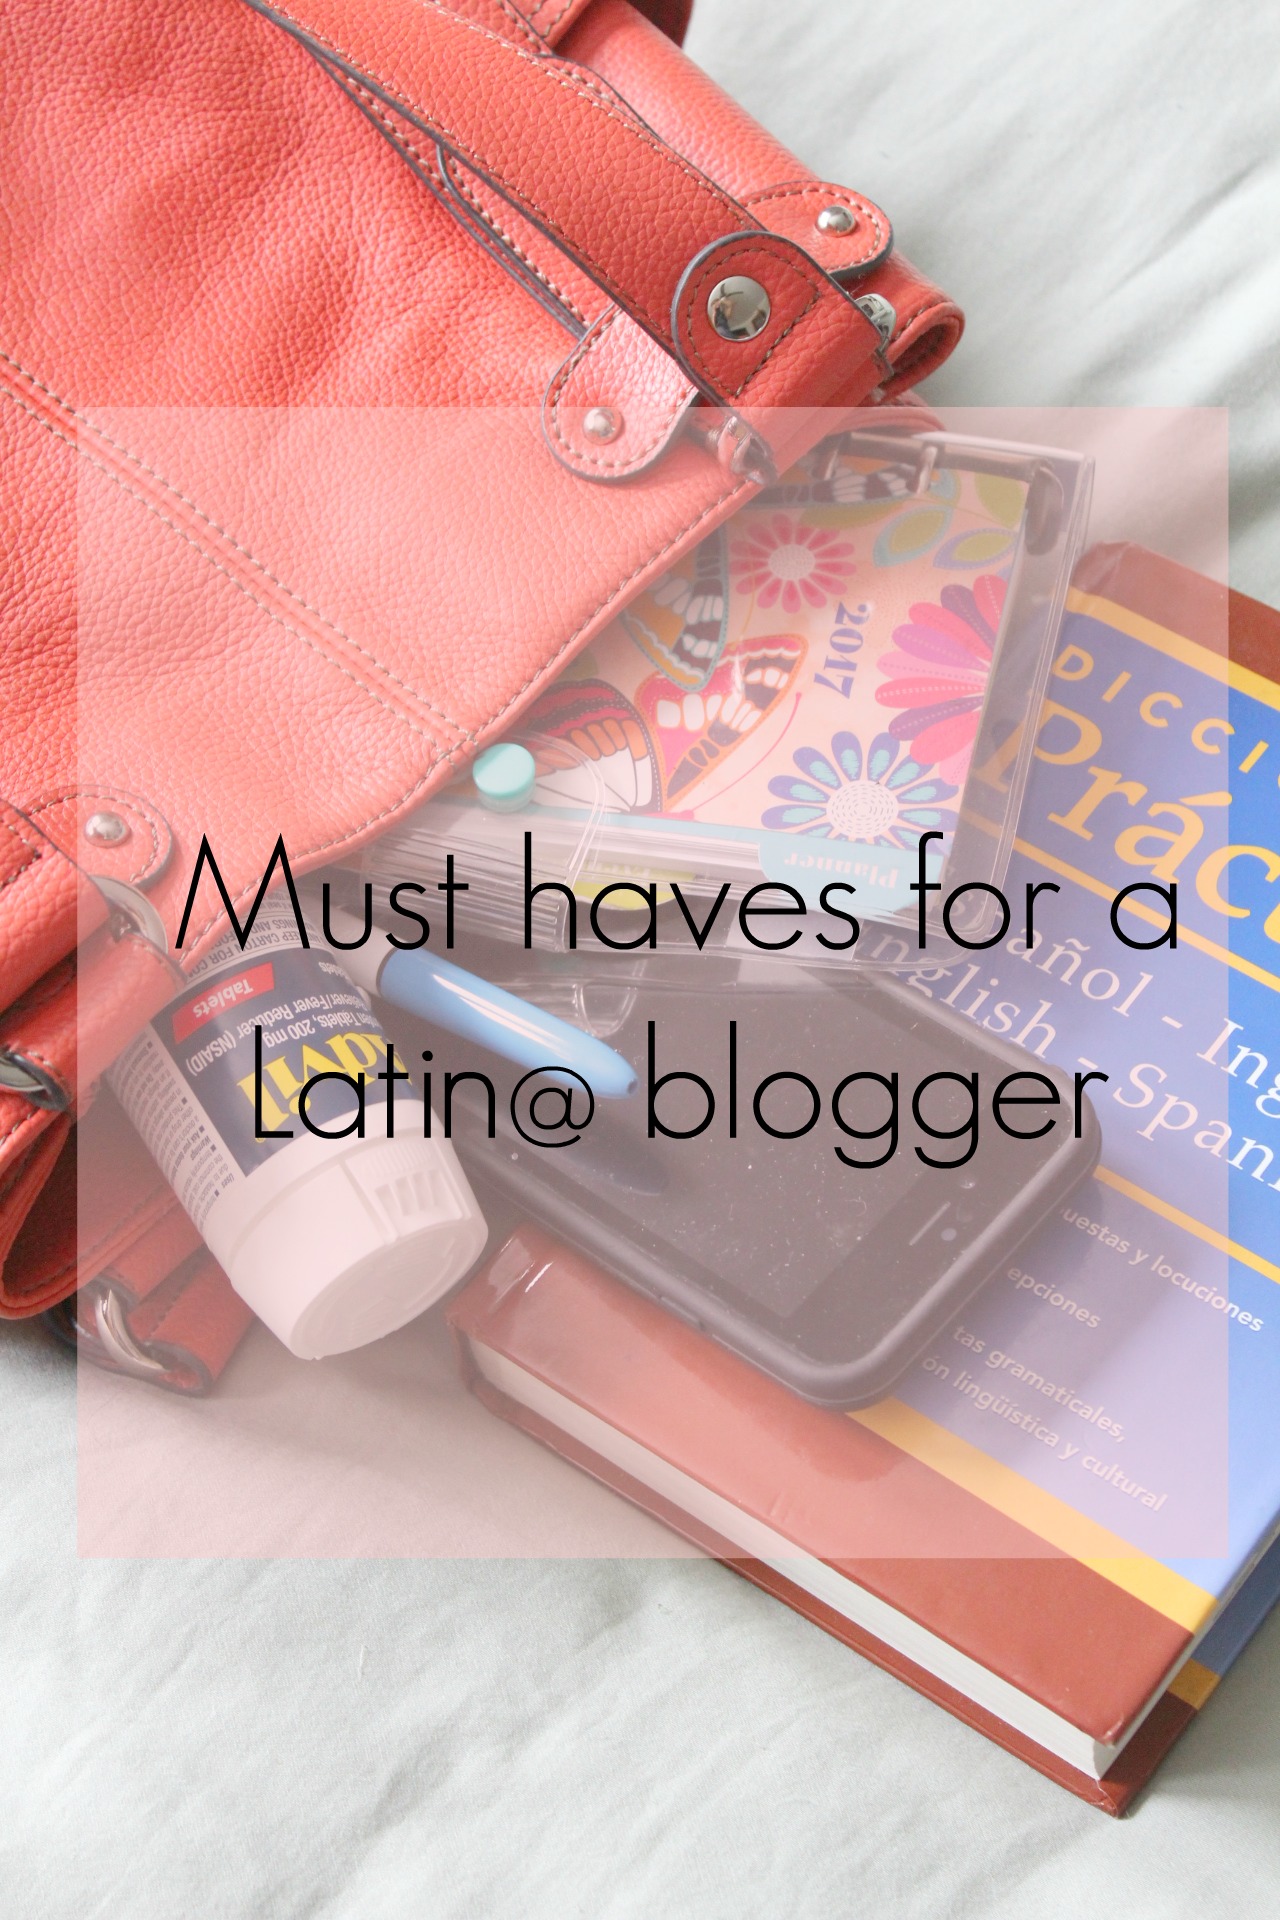 must-haves-for-a-latina-blogger